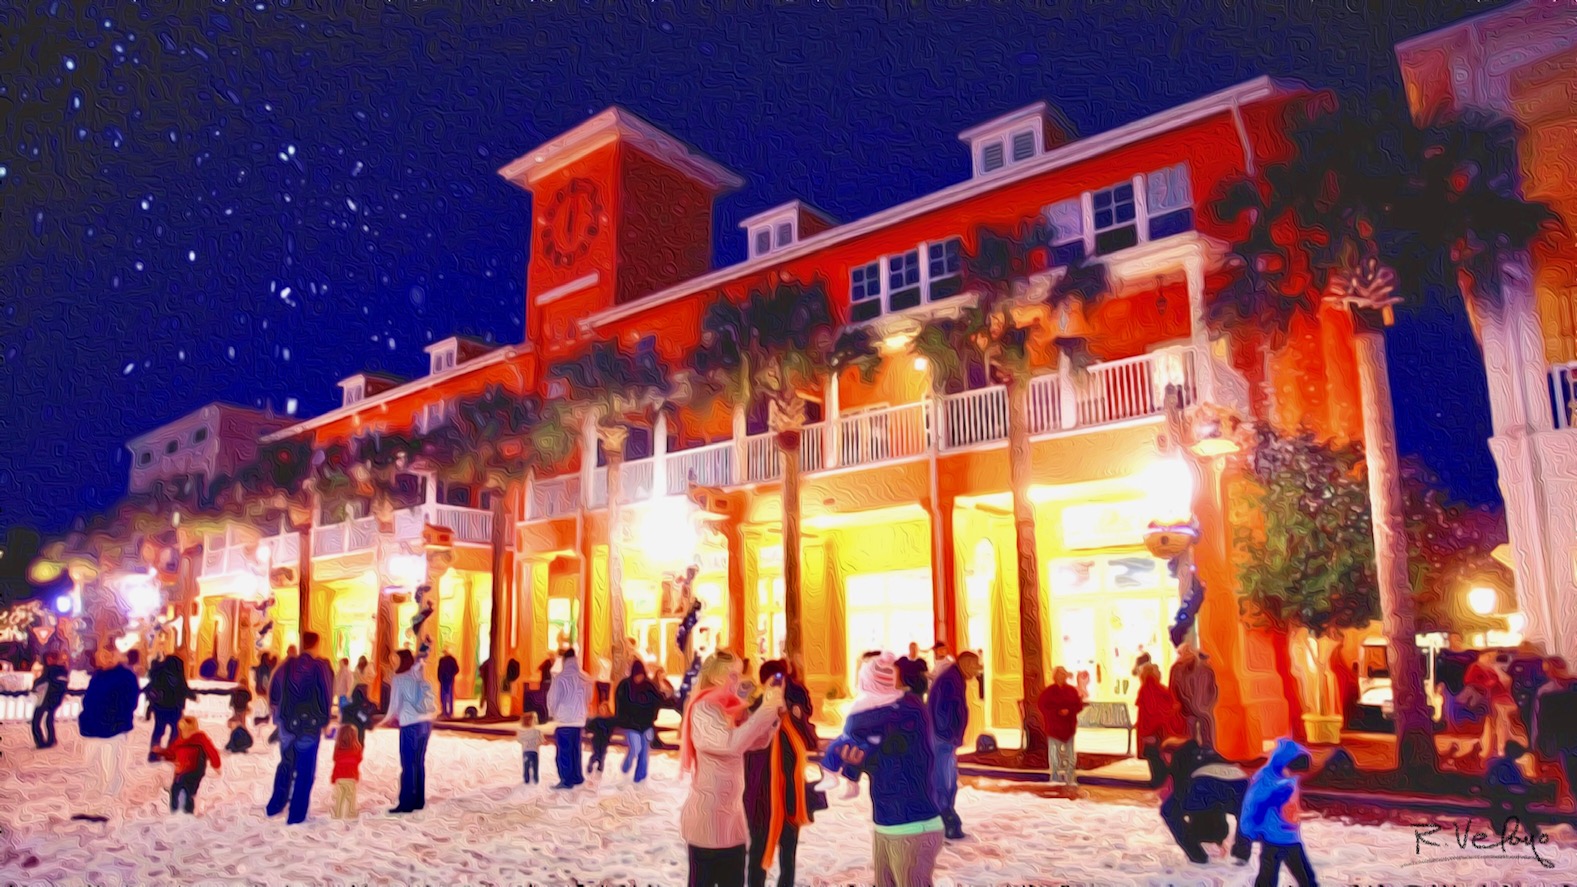 "A NIGHT IN DECEMBER AT CELEBRATION TOWN CENTER" [Created: 2/10/2021]